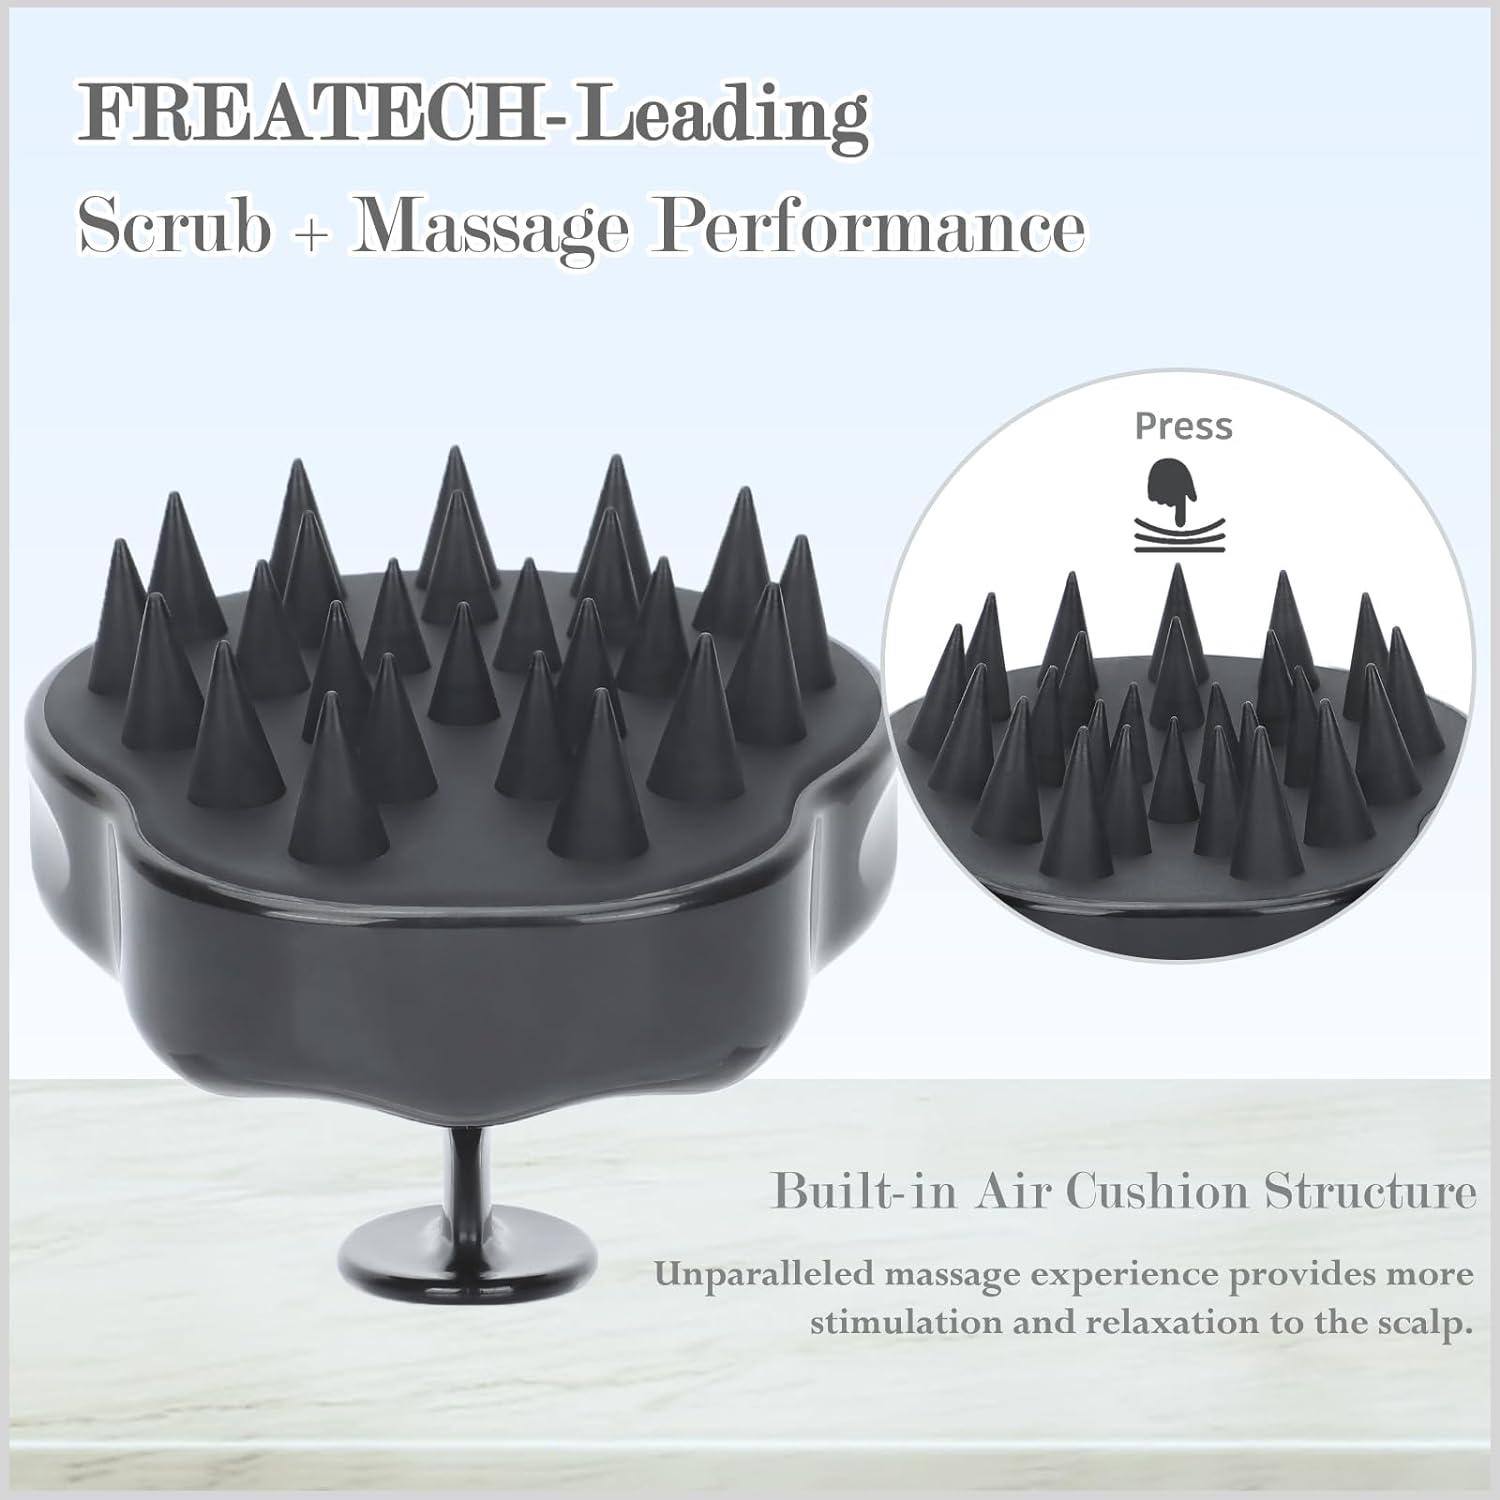 Hair Scalp Massager Shampoo Brush, FReatech [Wet & Dry] Manual Head Scalp Massage Brush, Soft Silicone Bristles Care for The Scalp, Exfoliate and Remove Dandruff, Promote Hair Growth - Black